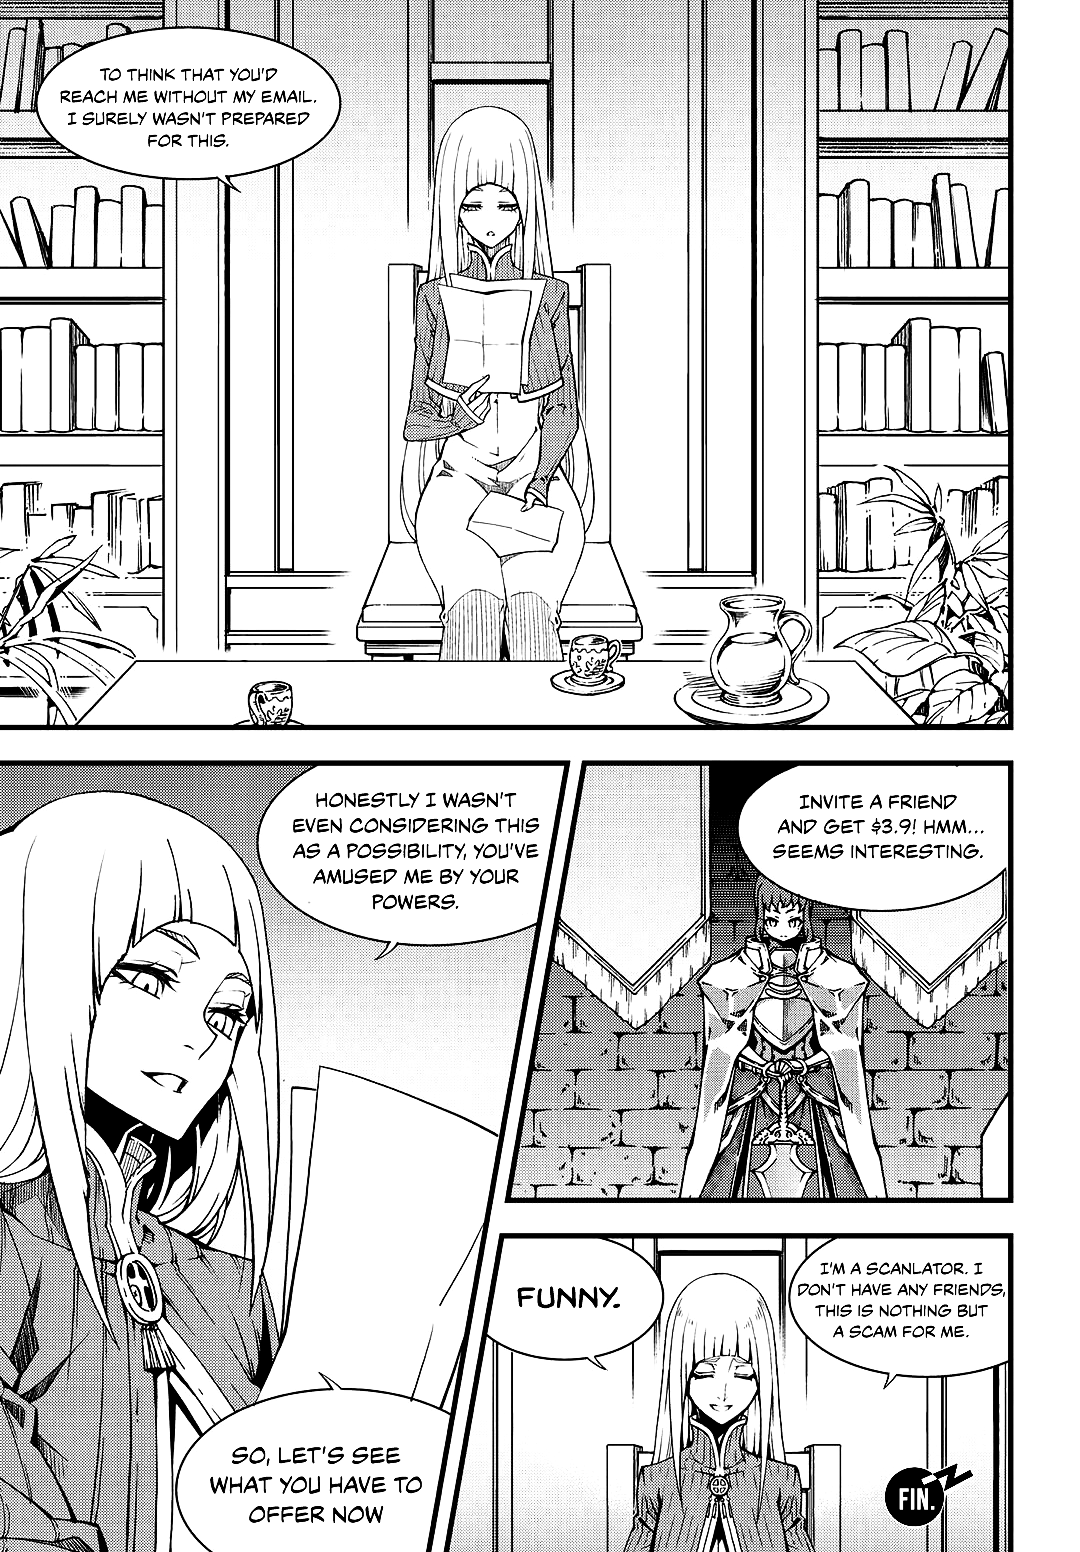 Witch Hunter - Page 2